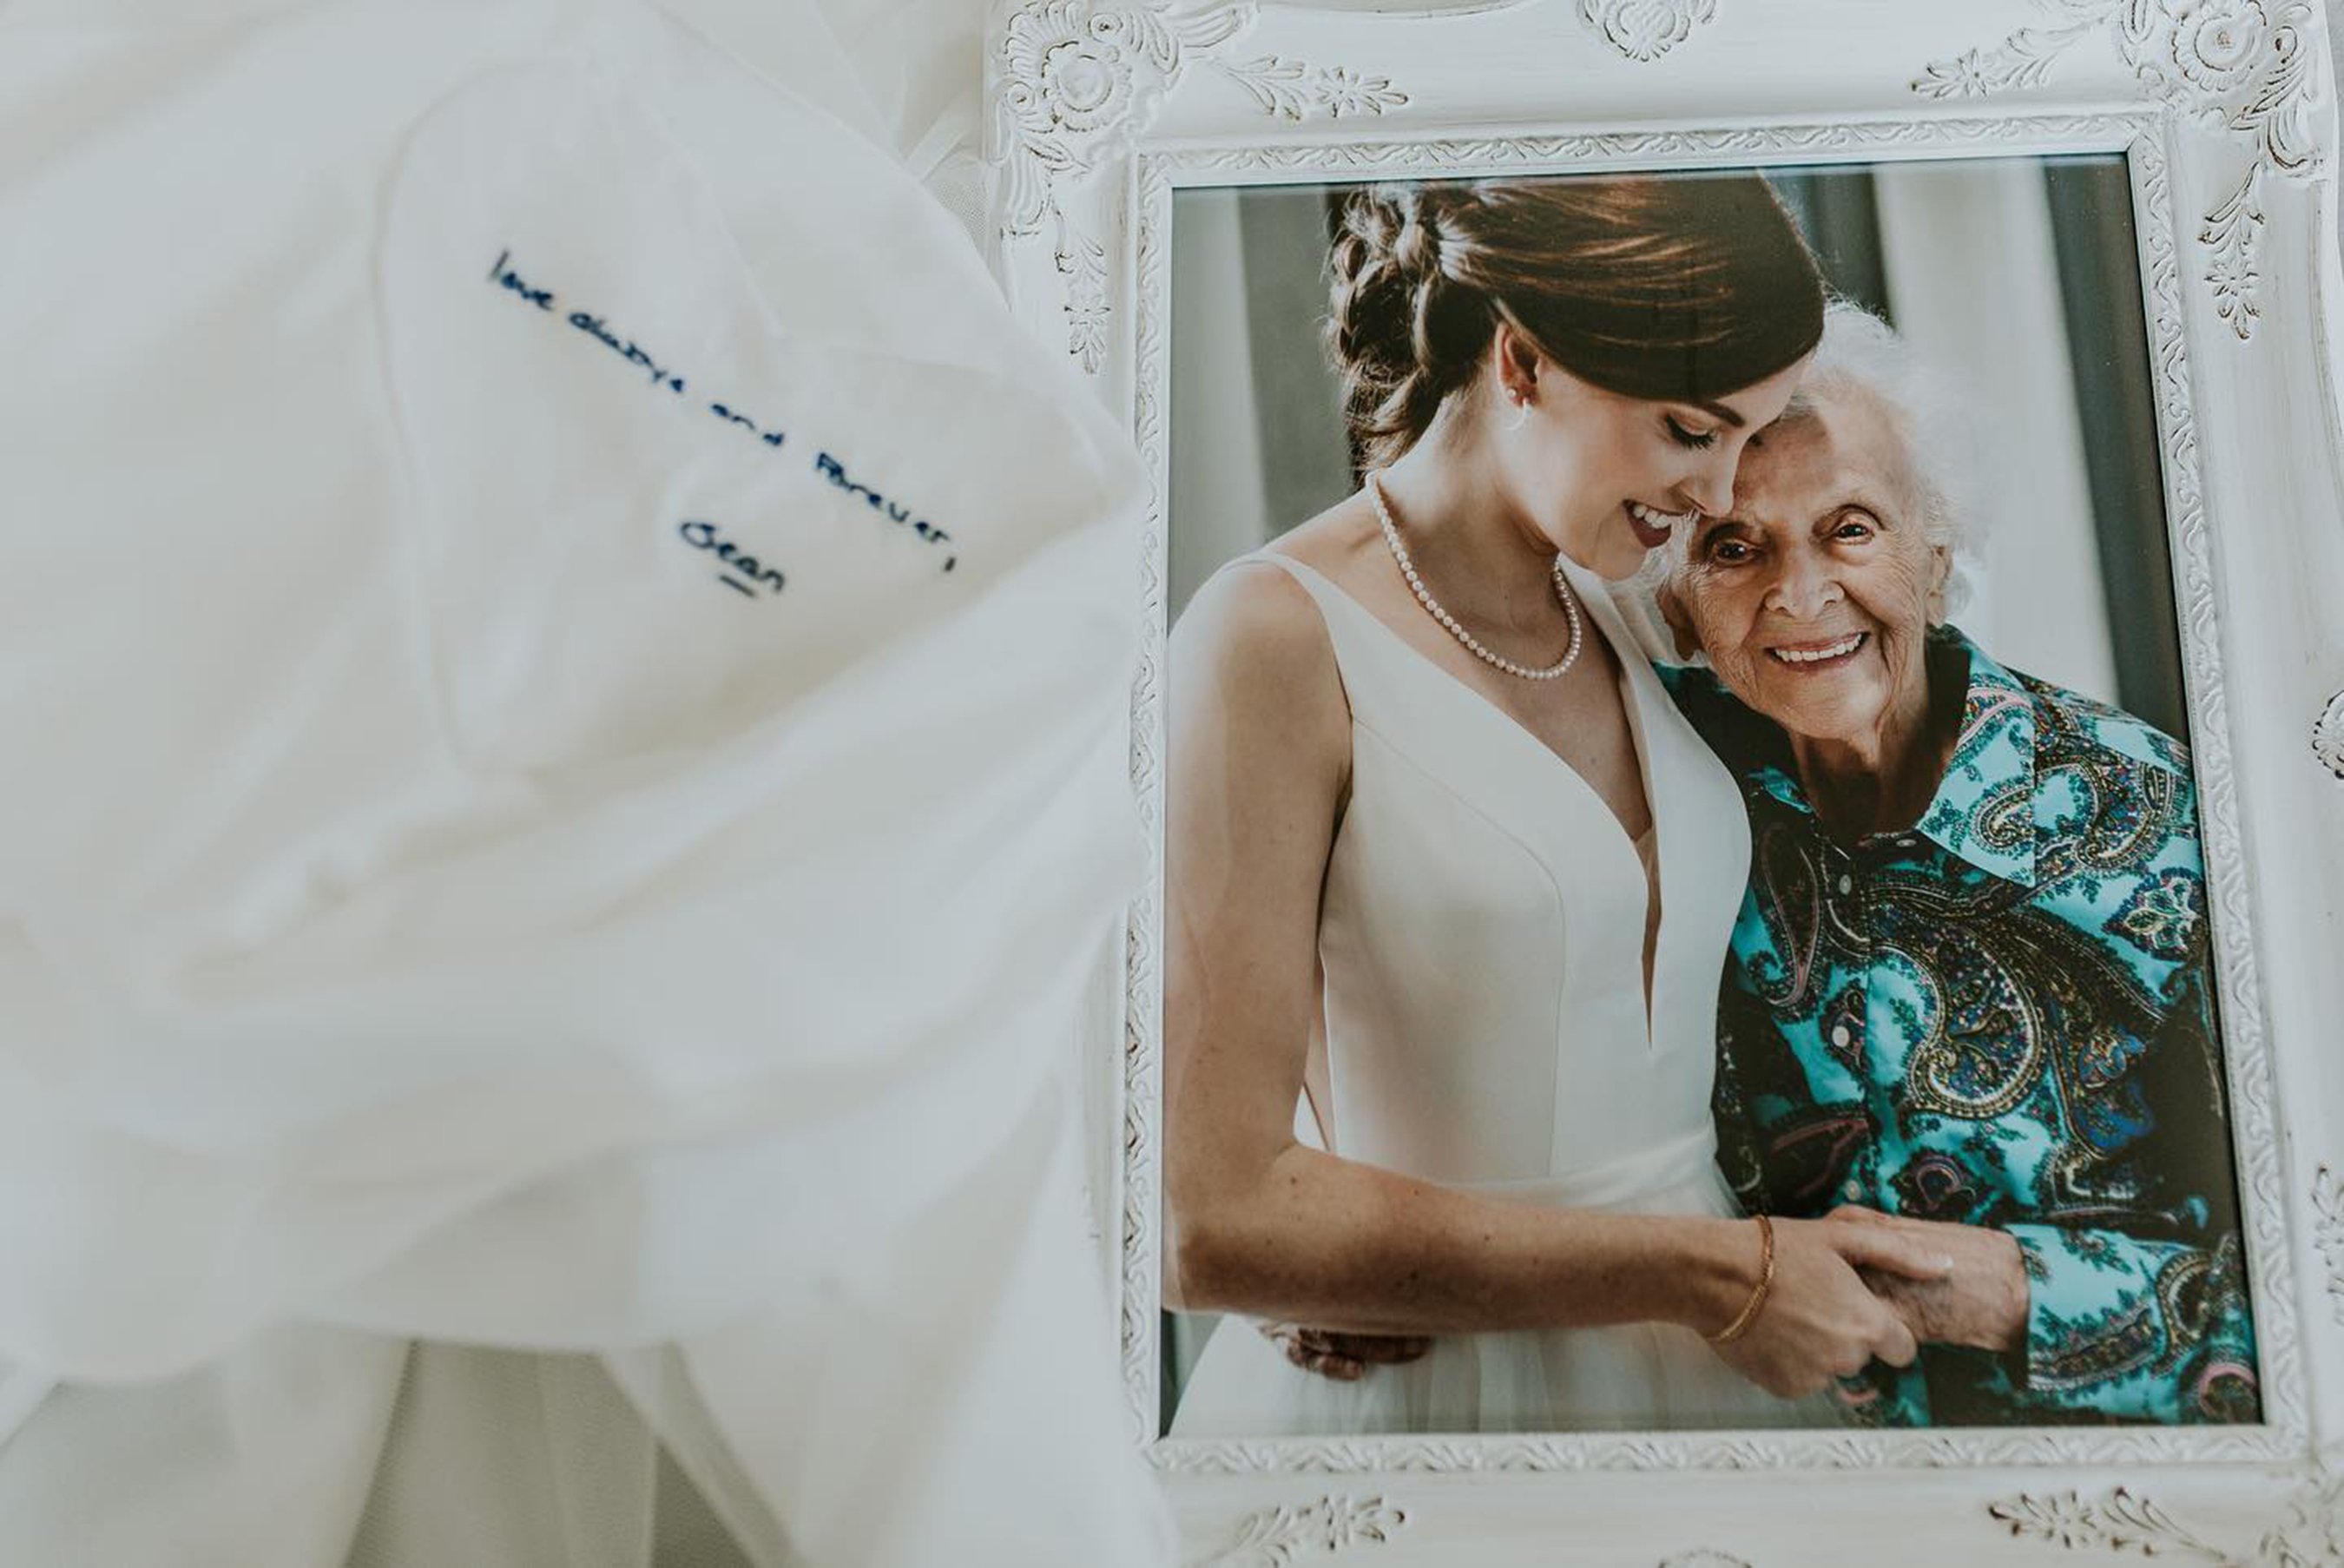 Bride-to-Be Flies to Grandmother in Hospice for 'Secret' Photoshoot in Her Wedding Gown